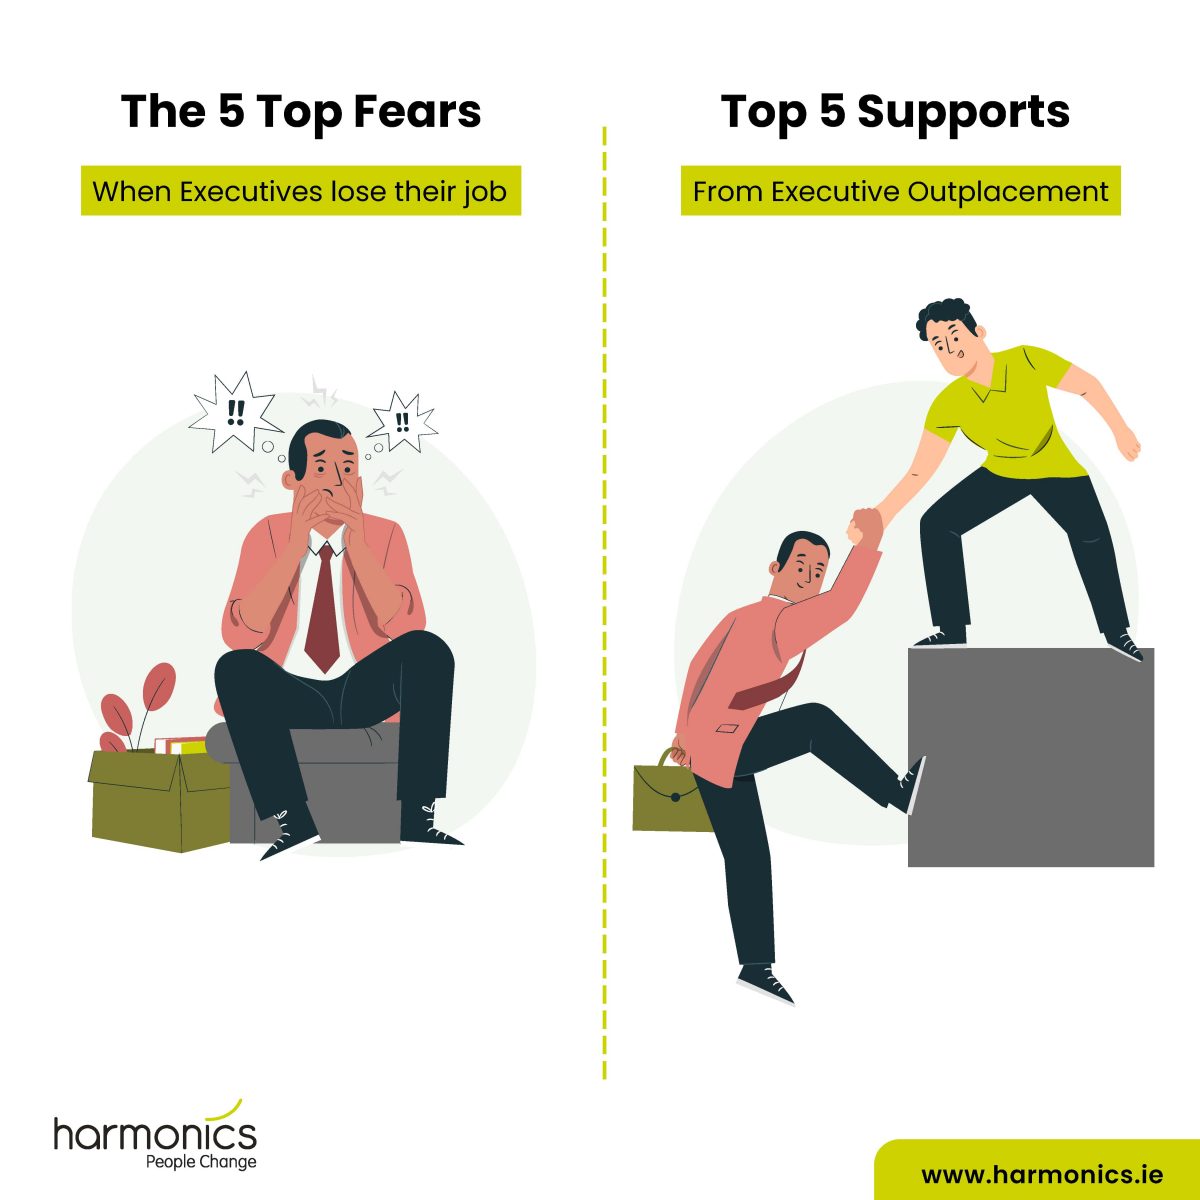 The 5 Top Fears when Executives lose their job